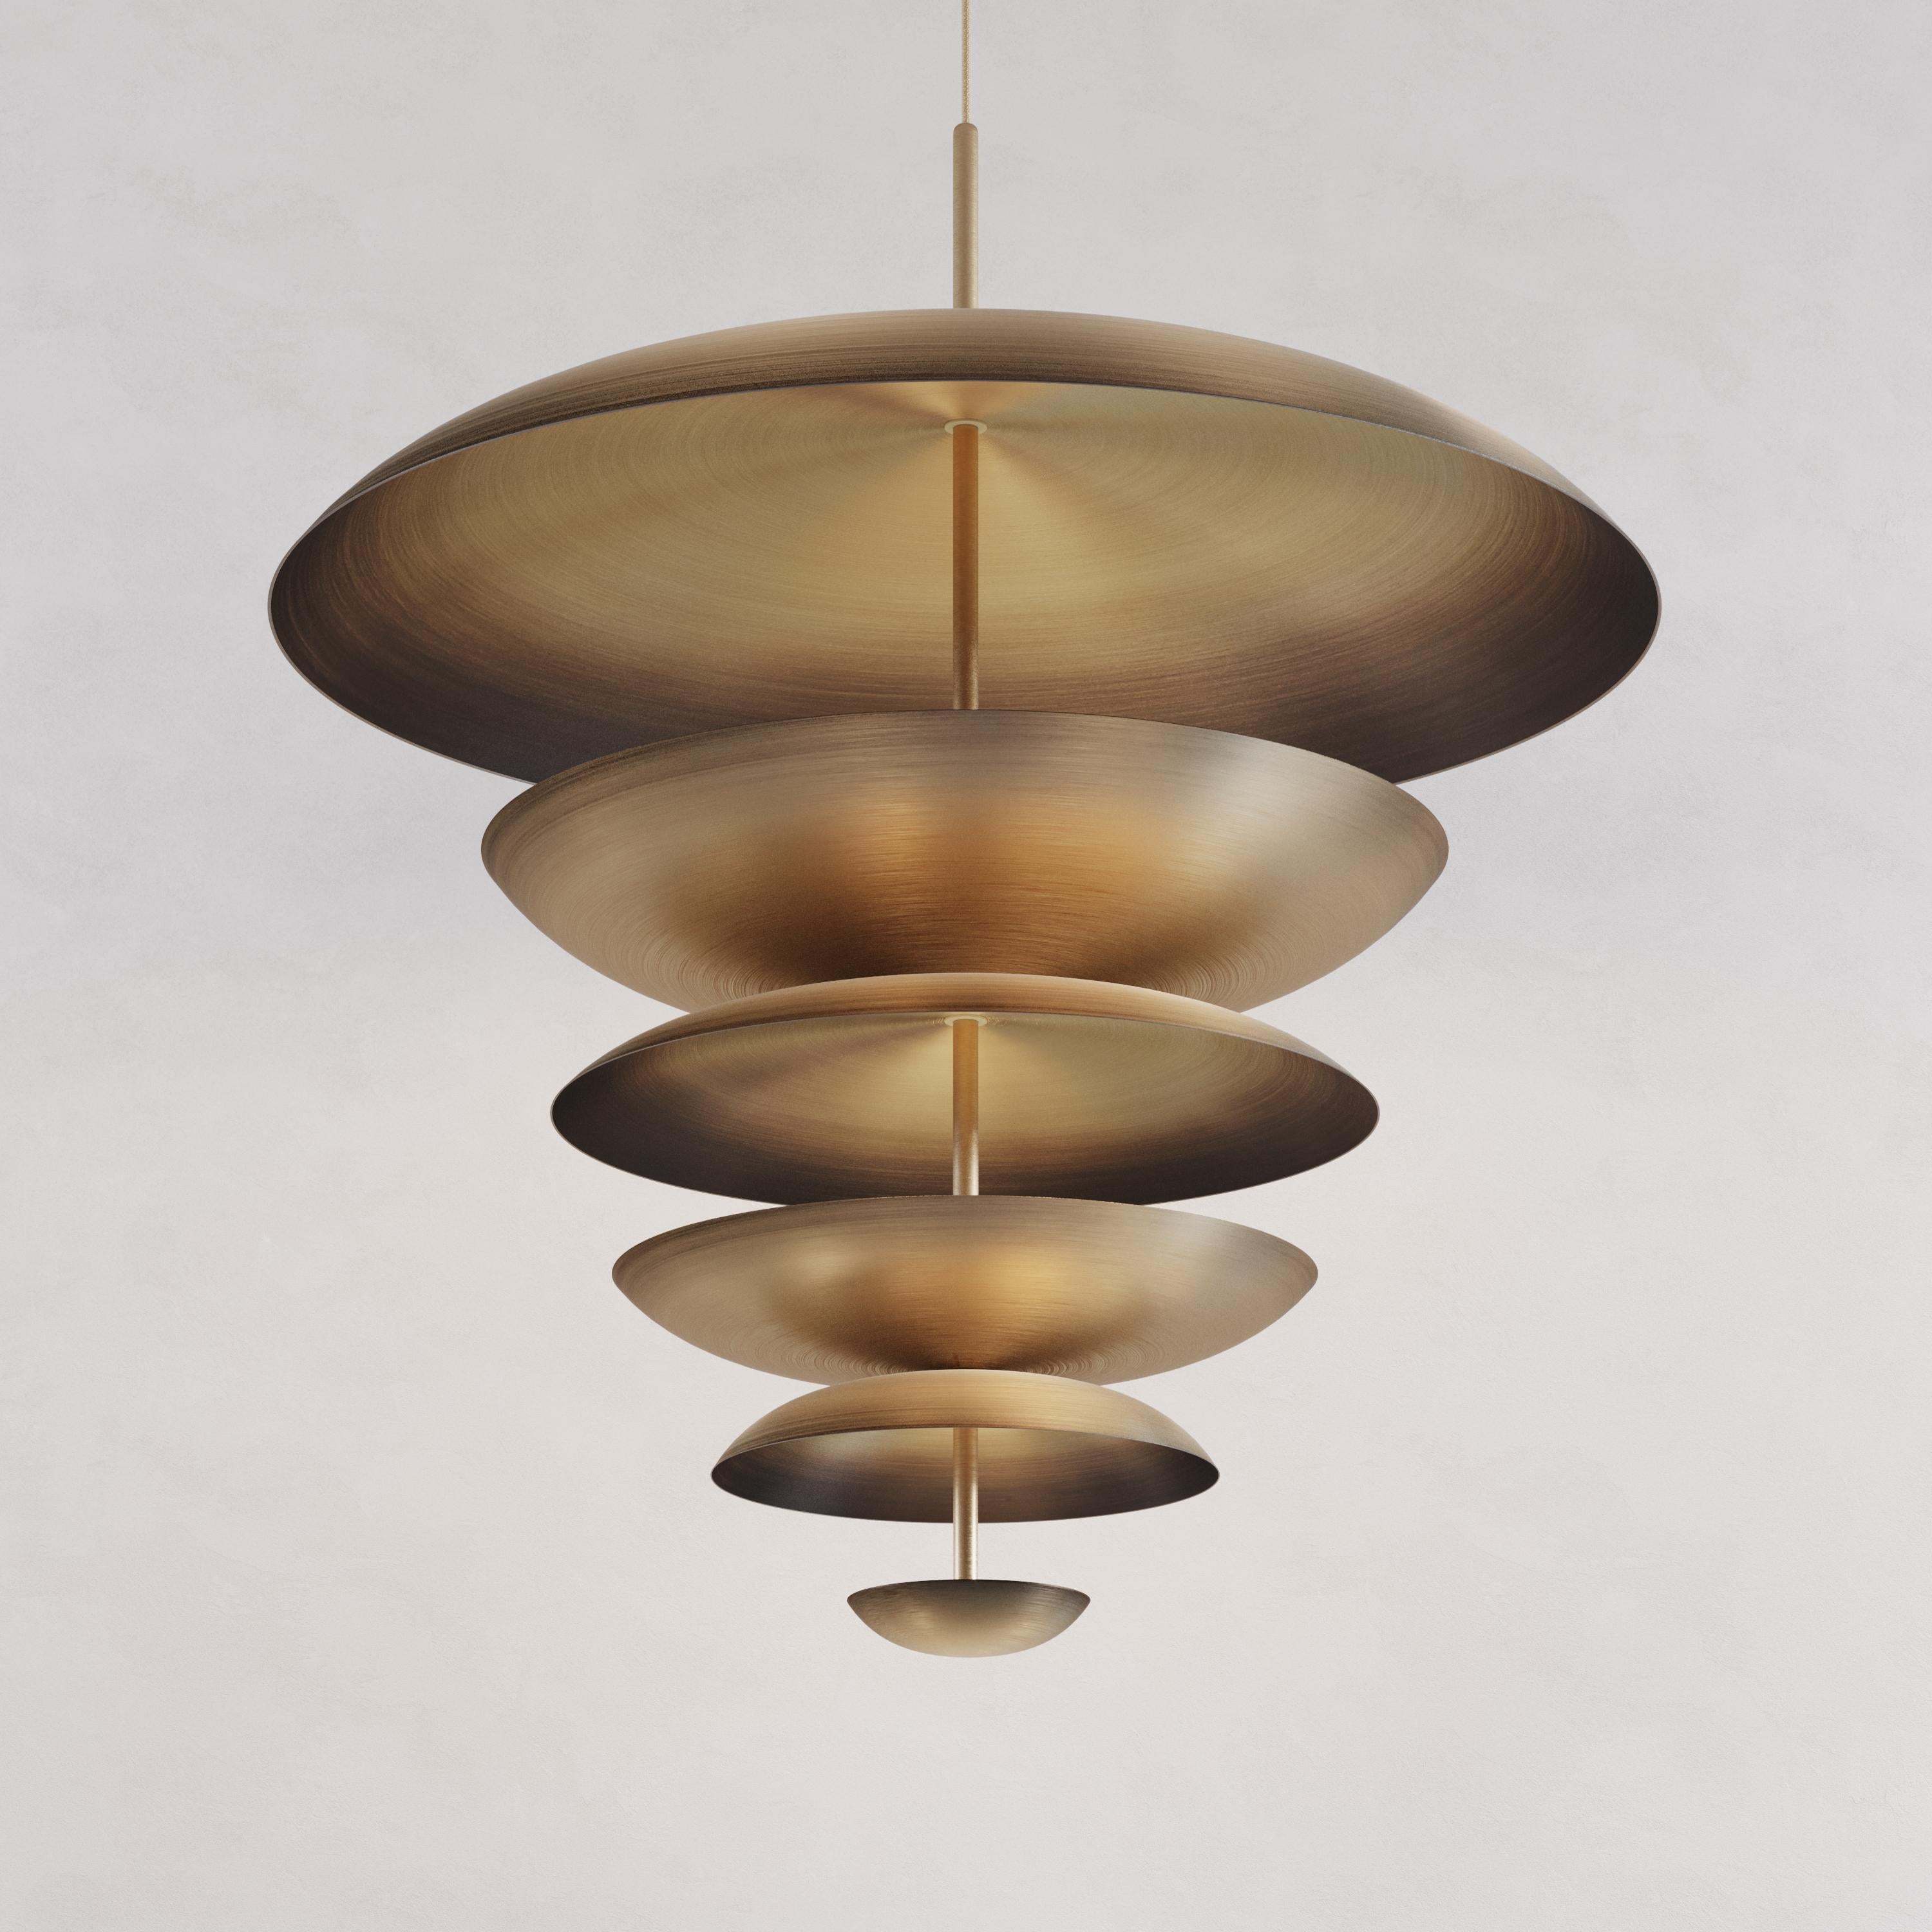 Finely hand-spun brass plates make up this pendant light. One side of the plate is finished in a bronze gradient patina while the other side in a gently brushed brass gradient. The light is projected into the shades and reflects out, illuminating